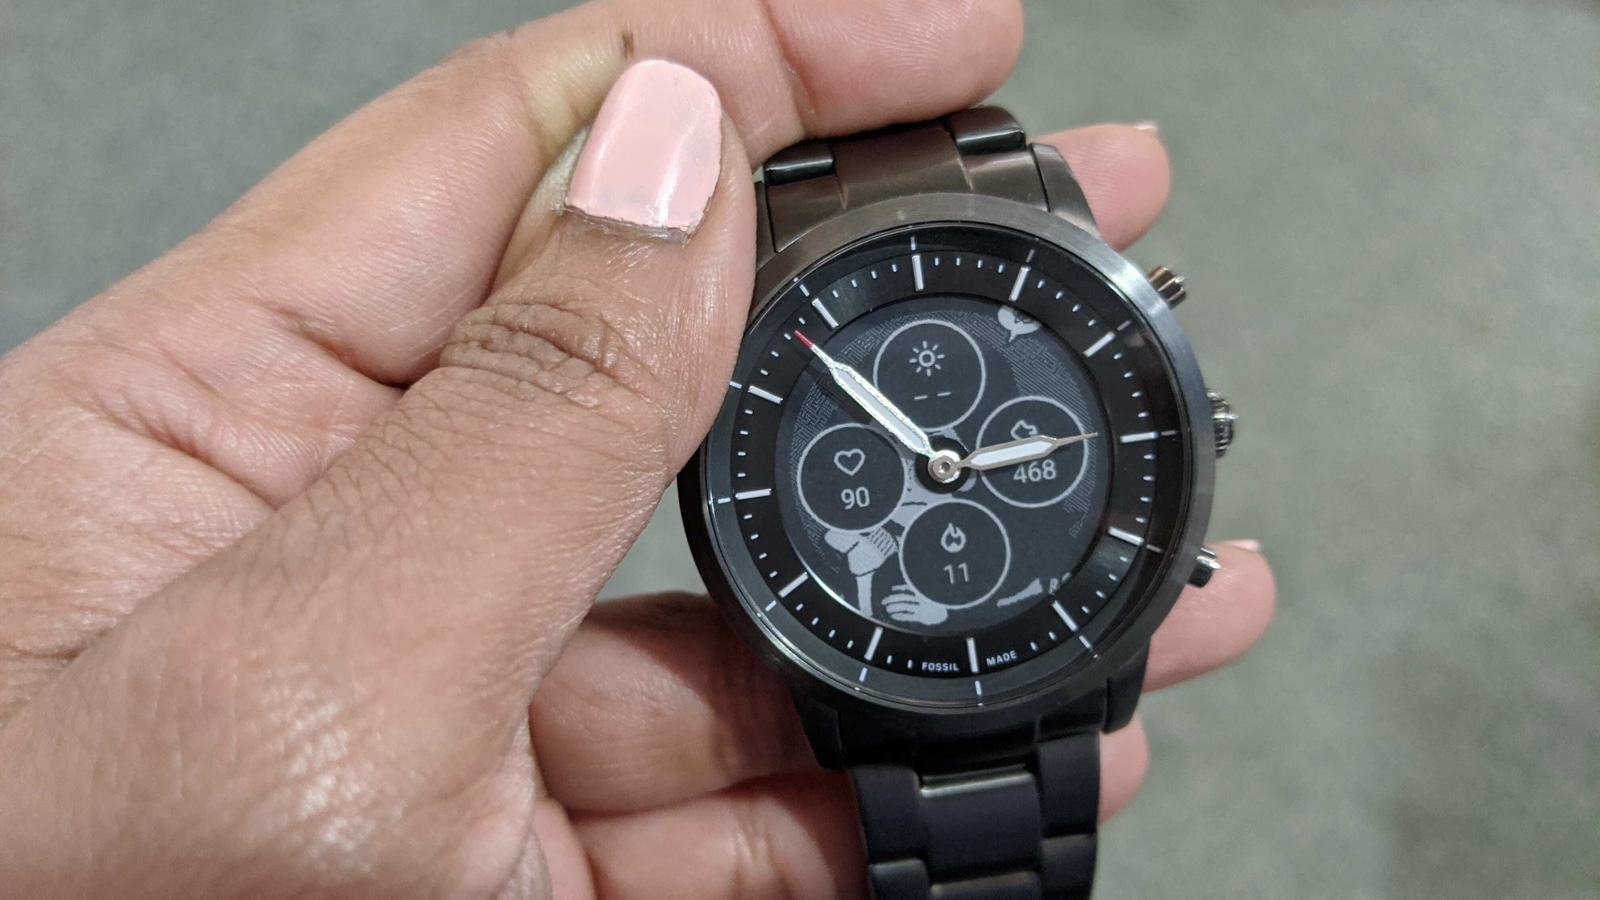 Fossil Hybrid HR review: More watch than smartwatch, and that's great |  Wearables Reviews